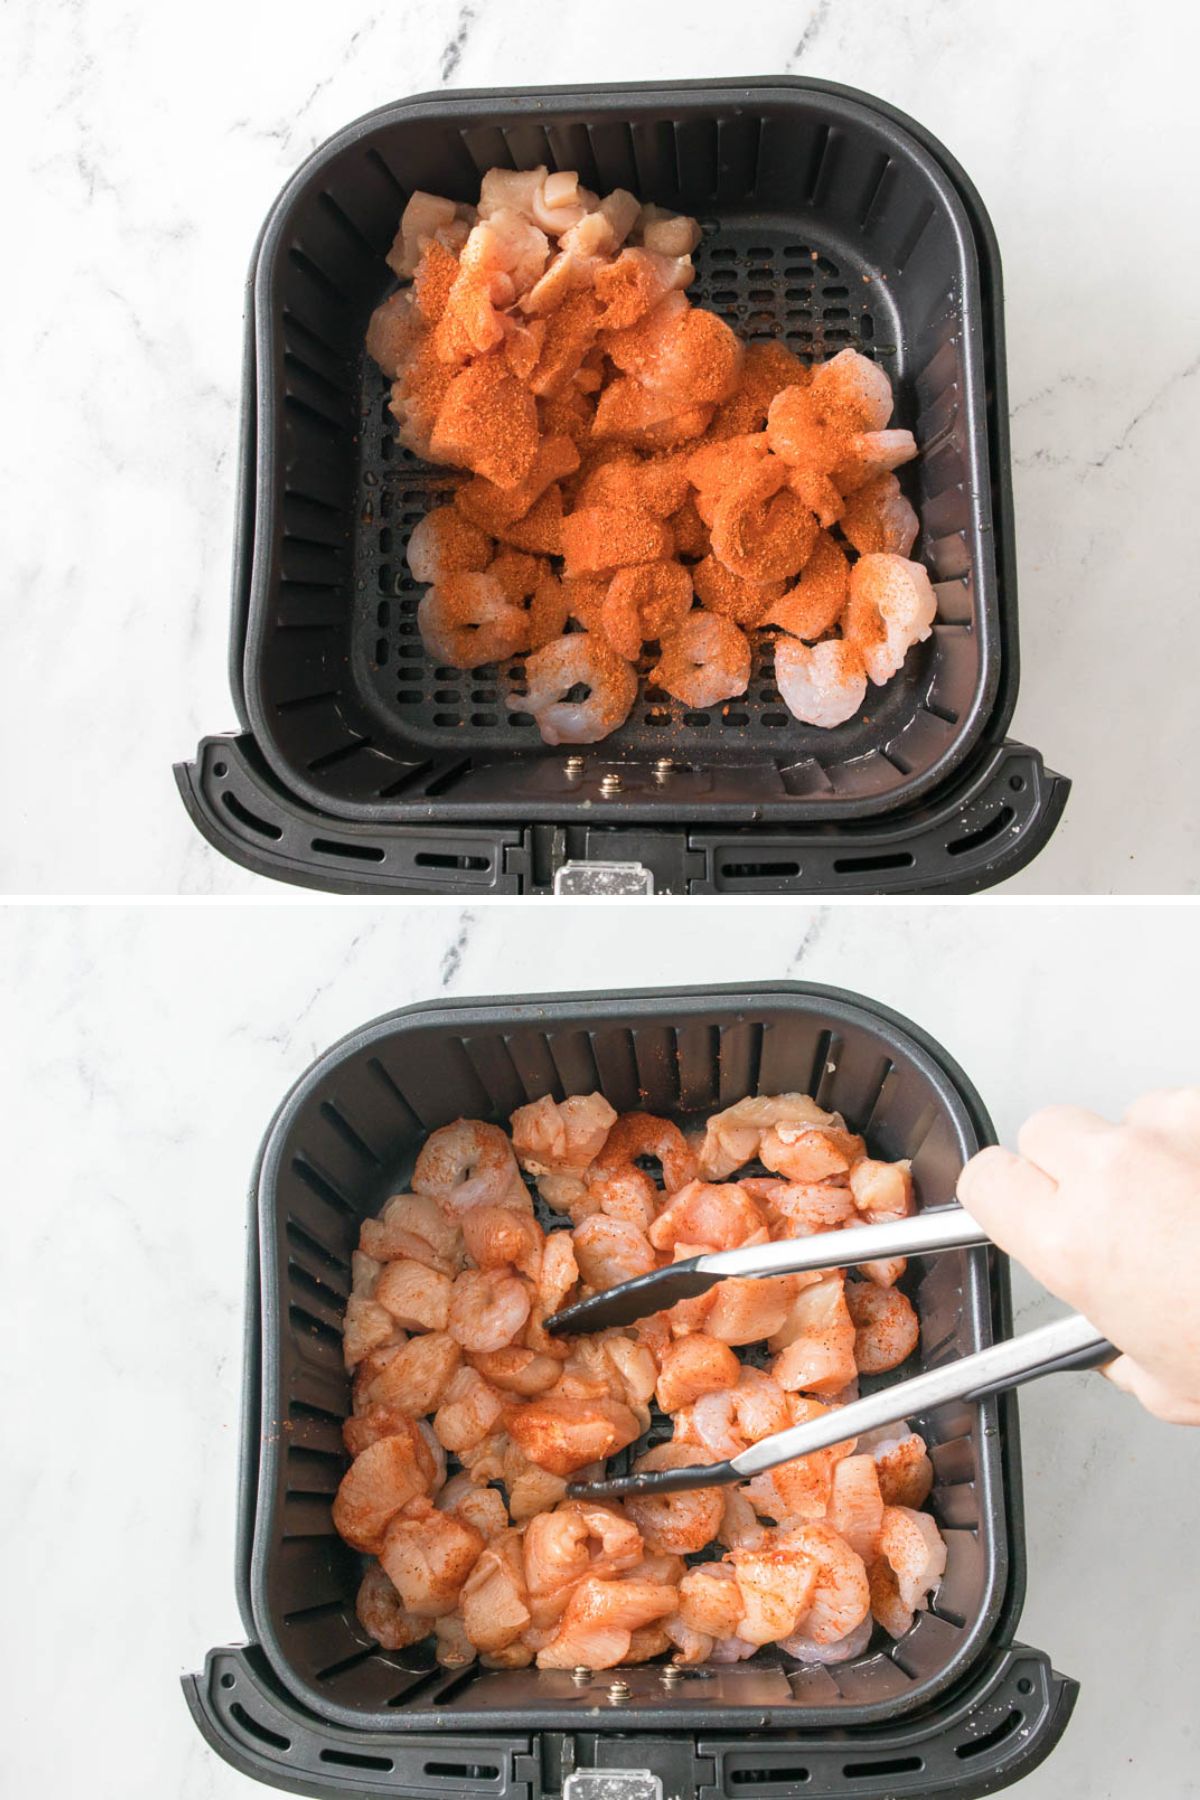 Pictures of how chicken and shrimp being seasoned in the air fryer basket.